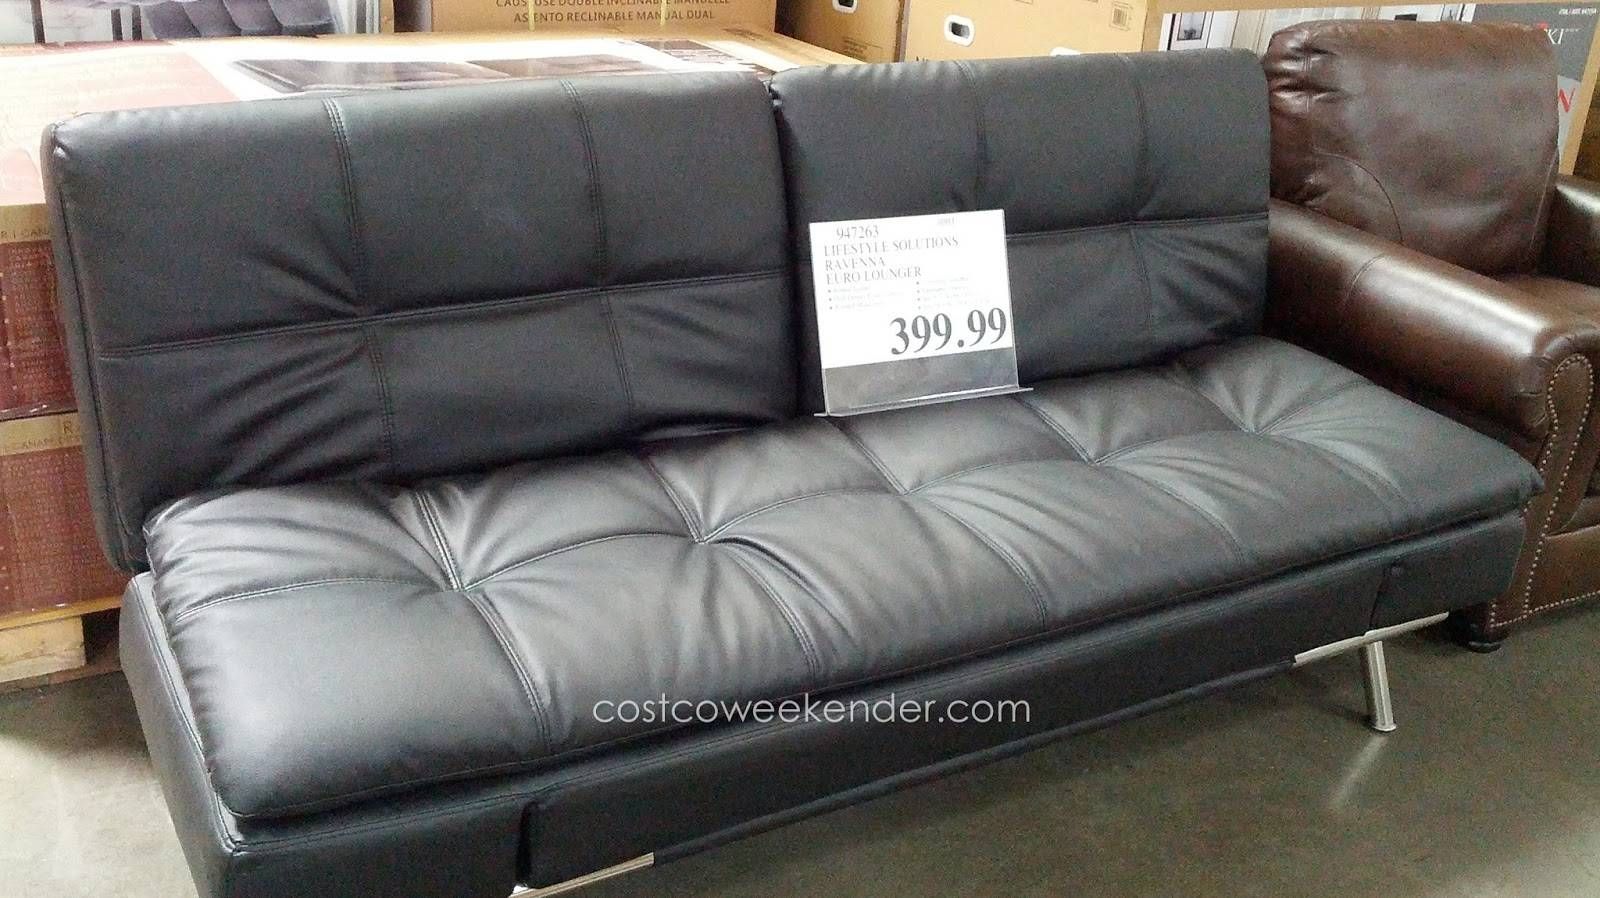 Furniture: Costco Modular Sofa | Sofa Bed At Costco | Couches At Inside Euro Sofa Beds (View 4 of 15)